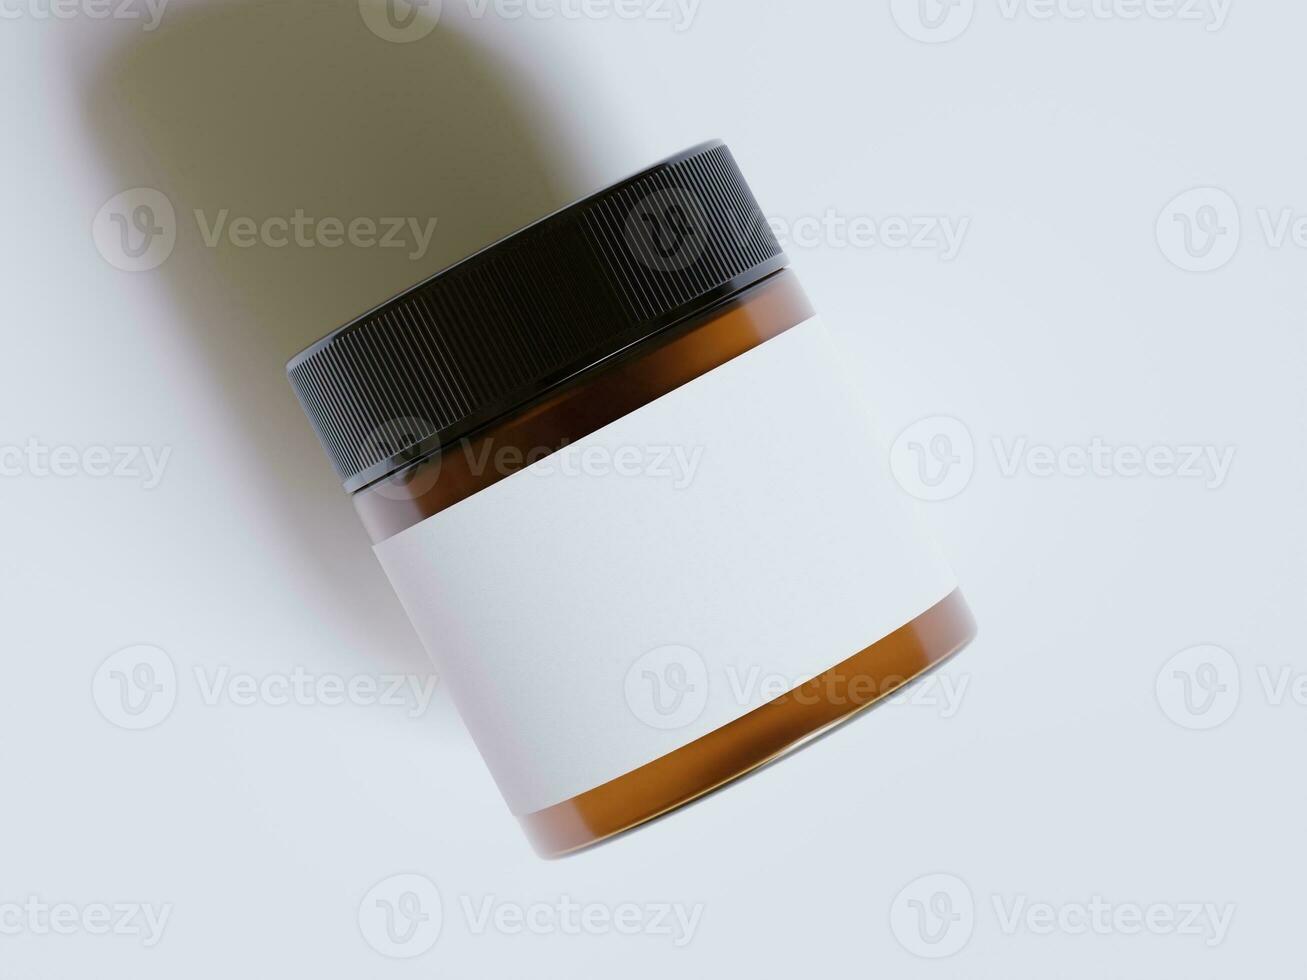 Amber Glass Cosmetic Jar with a realistic texture blank Label white color rendering 3D software illustration, brown jar color and black cap photo